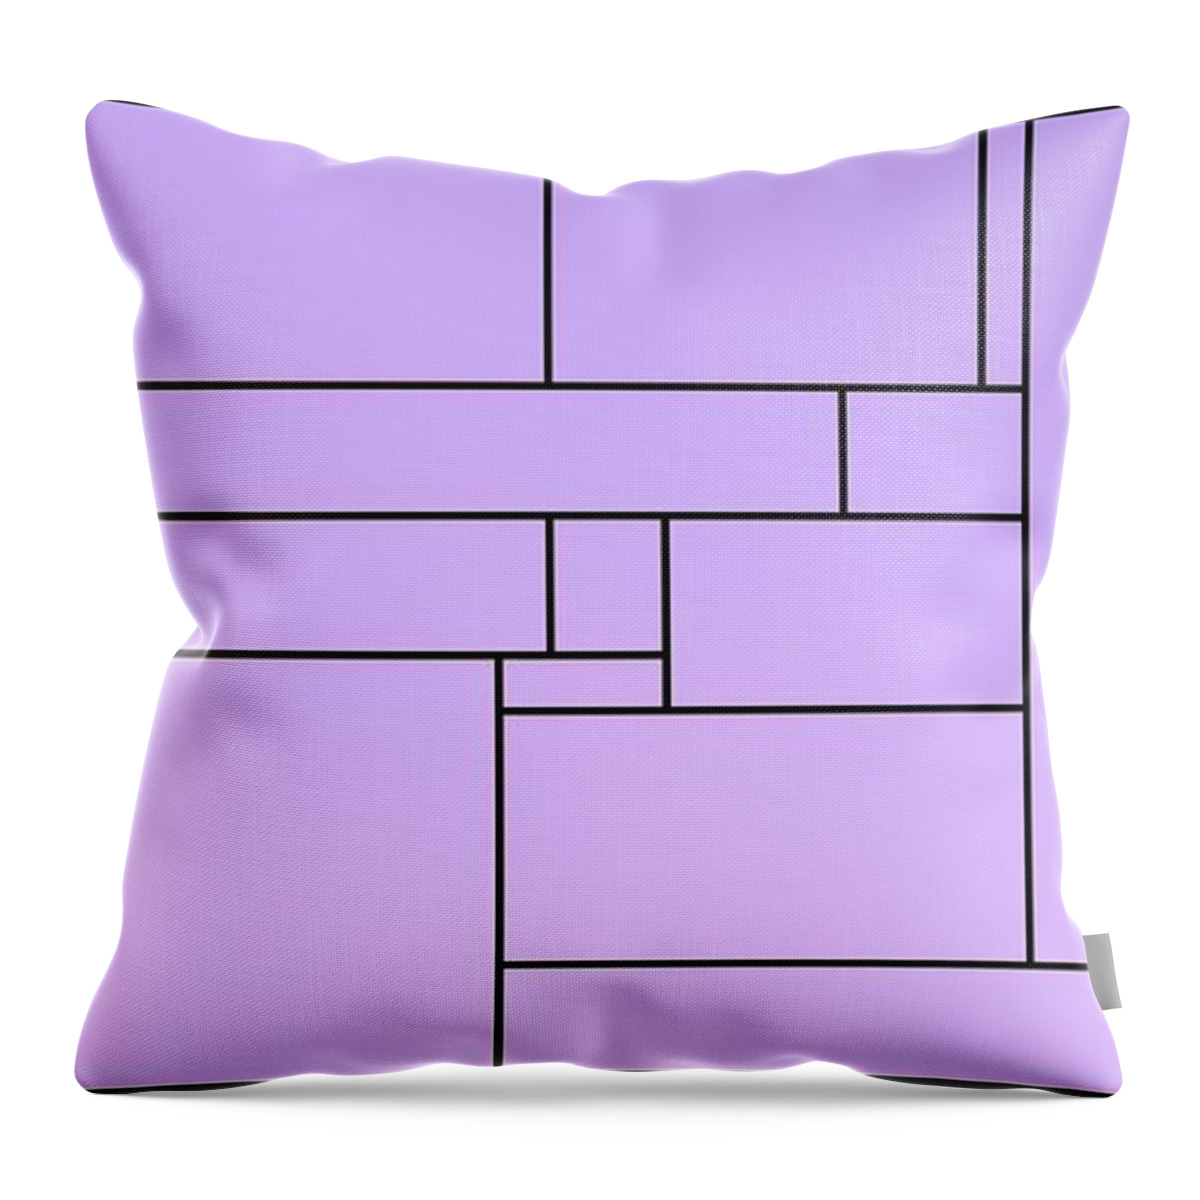 Art Geometric Throw Pillow featuring the digital art Backlight with violet composition by Alberto RuiZ